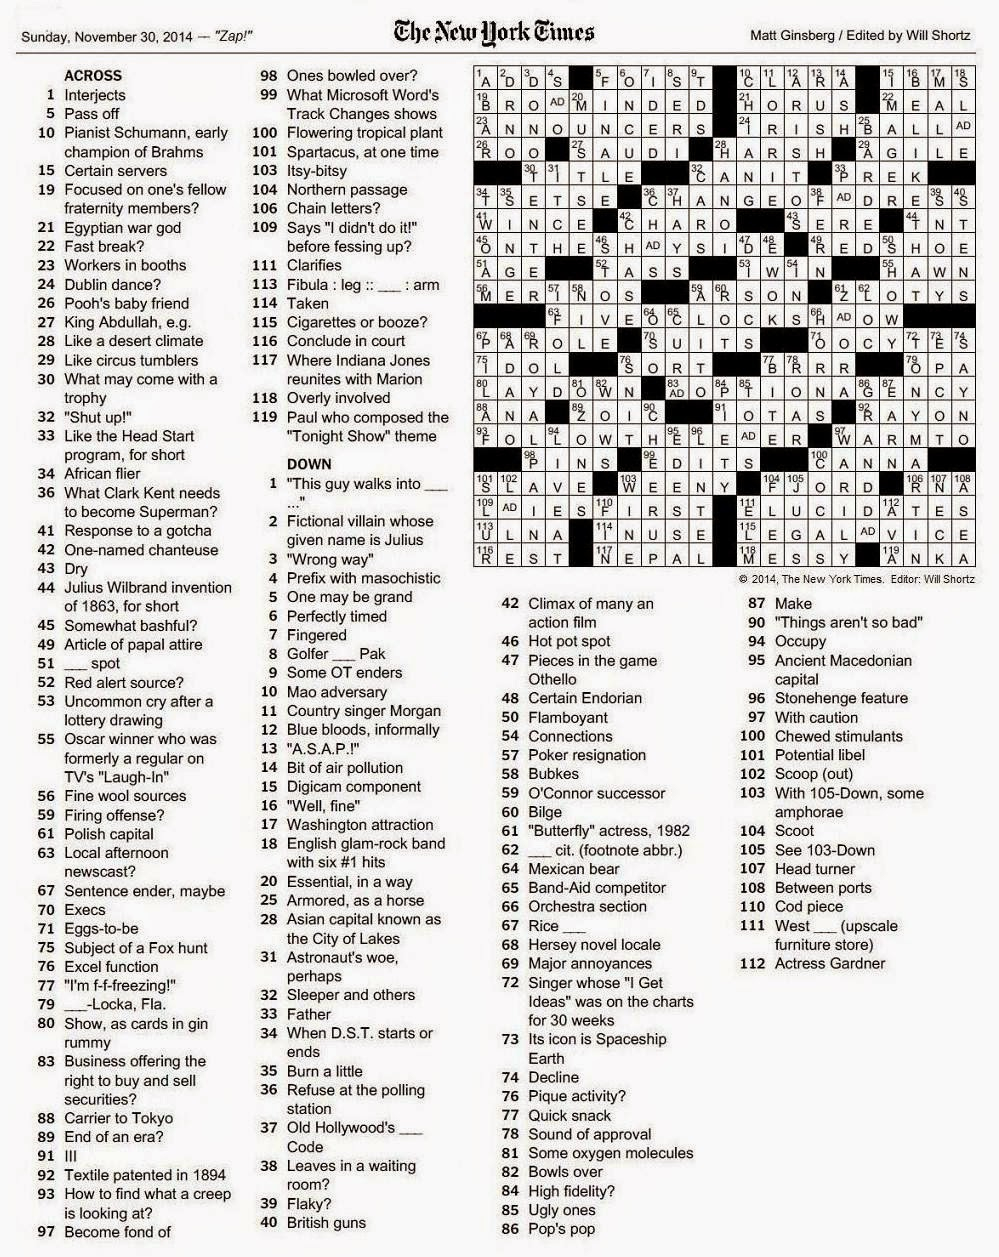 The New York Times Crossword In Gothic: 11.30.14 — Zap! - La Times Crossword Printable Version